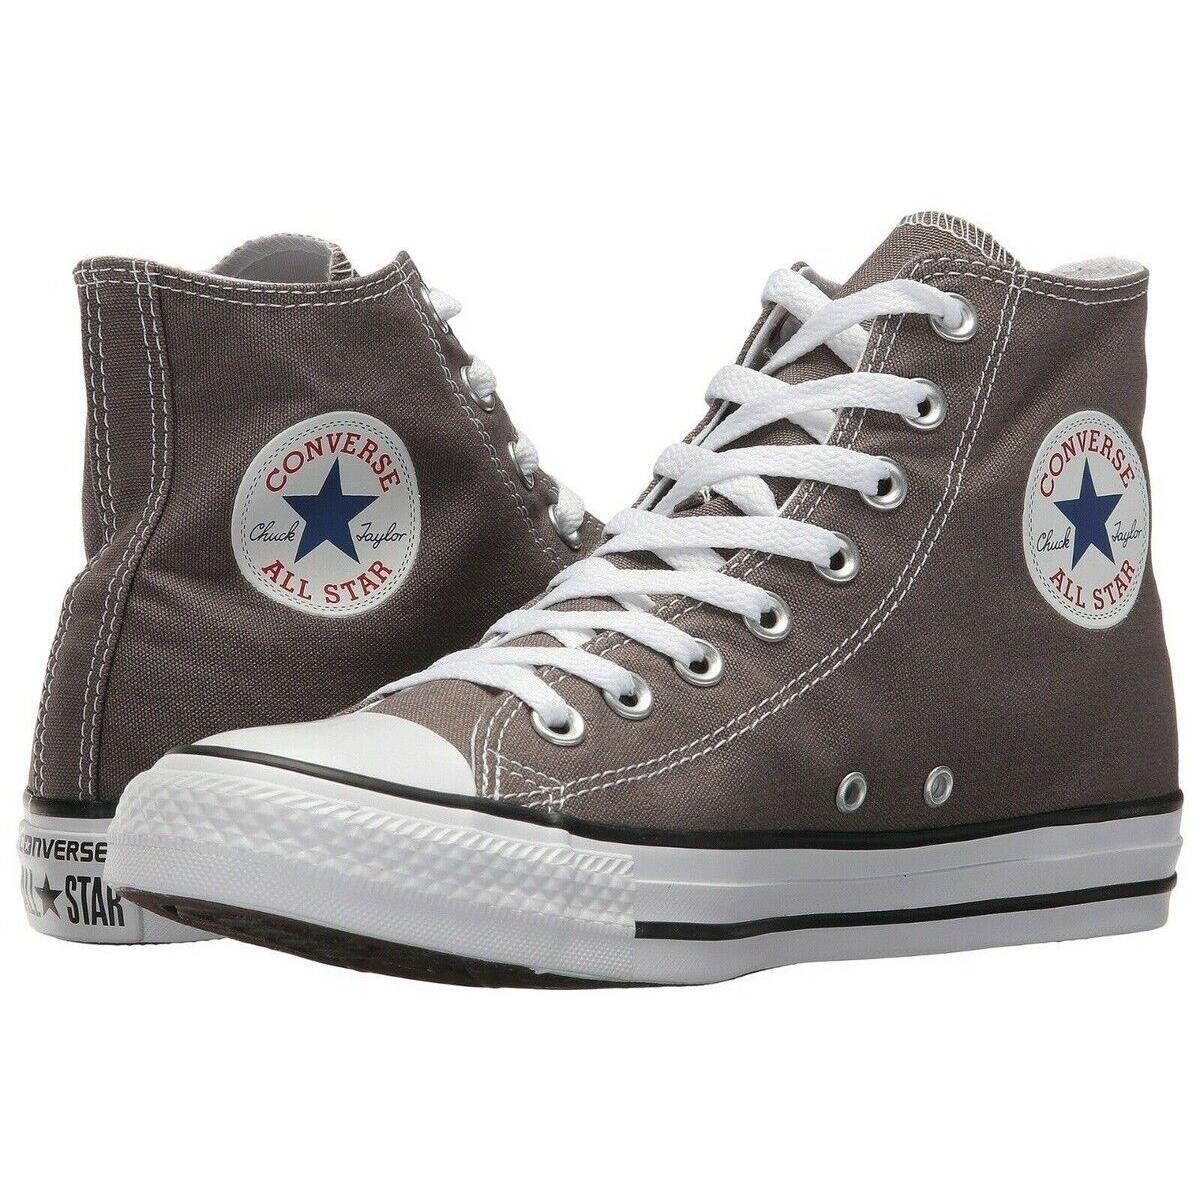 Converse Men`s Chuck Taylor All Star Classic High Top Sneaker Shoes Charcoal